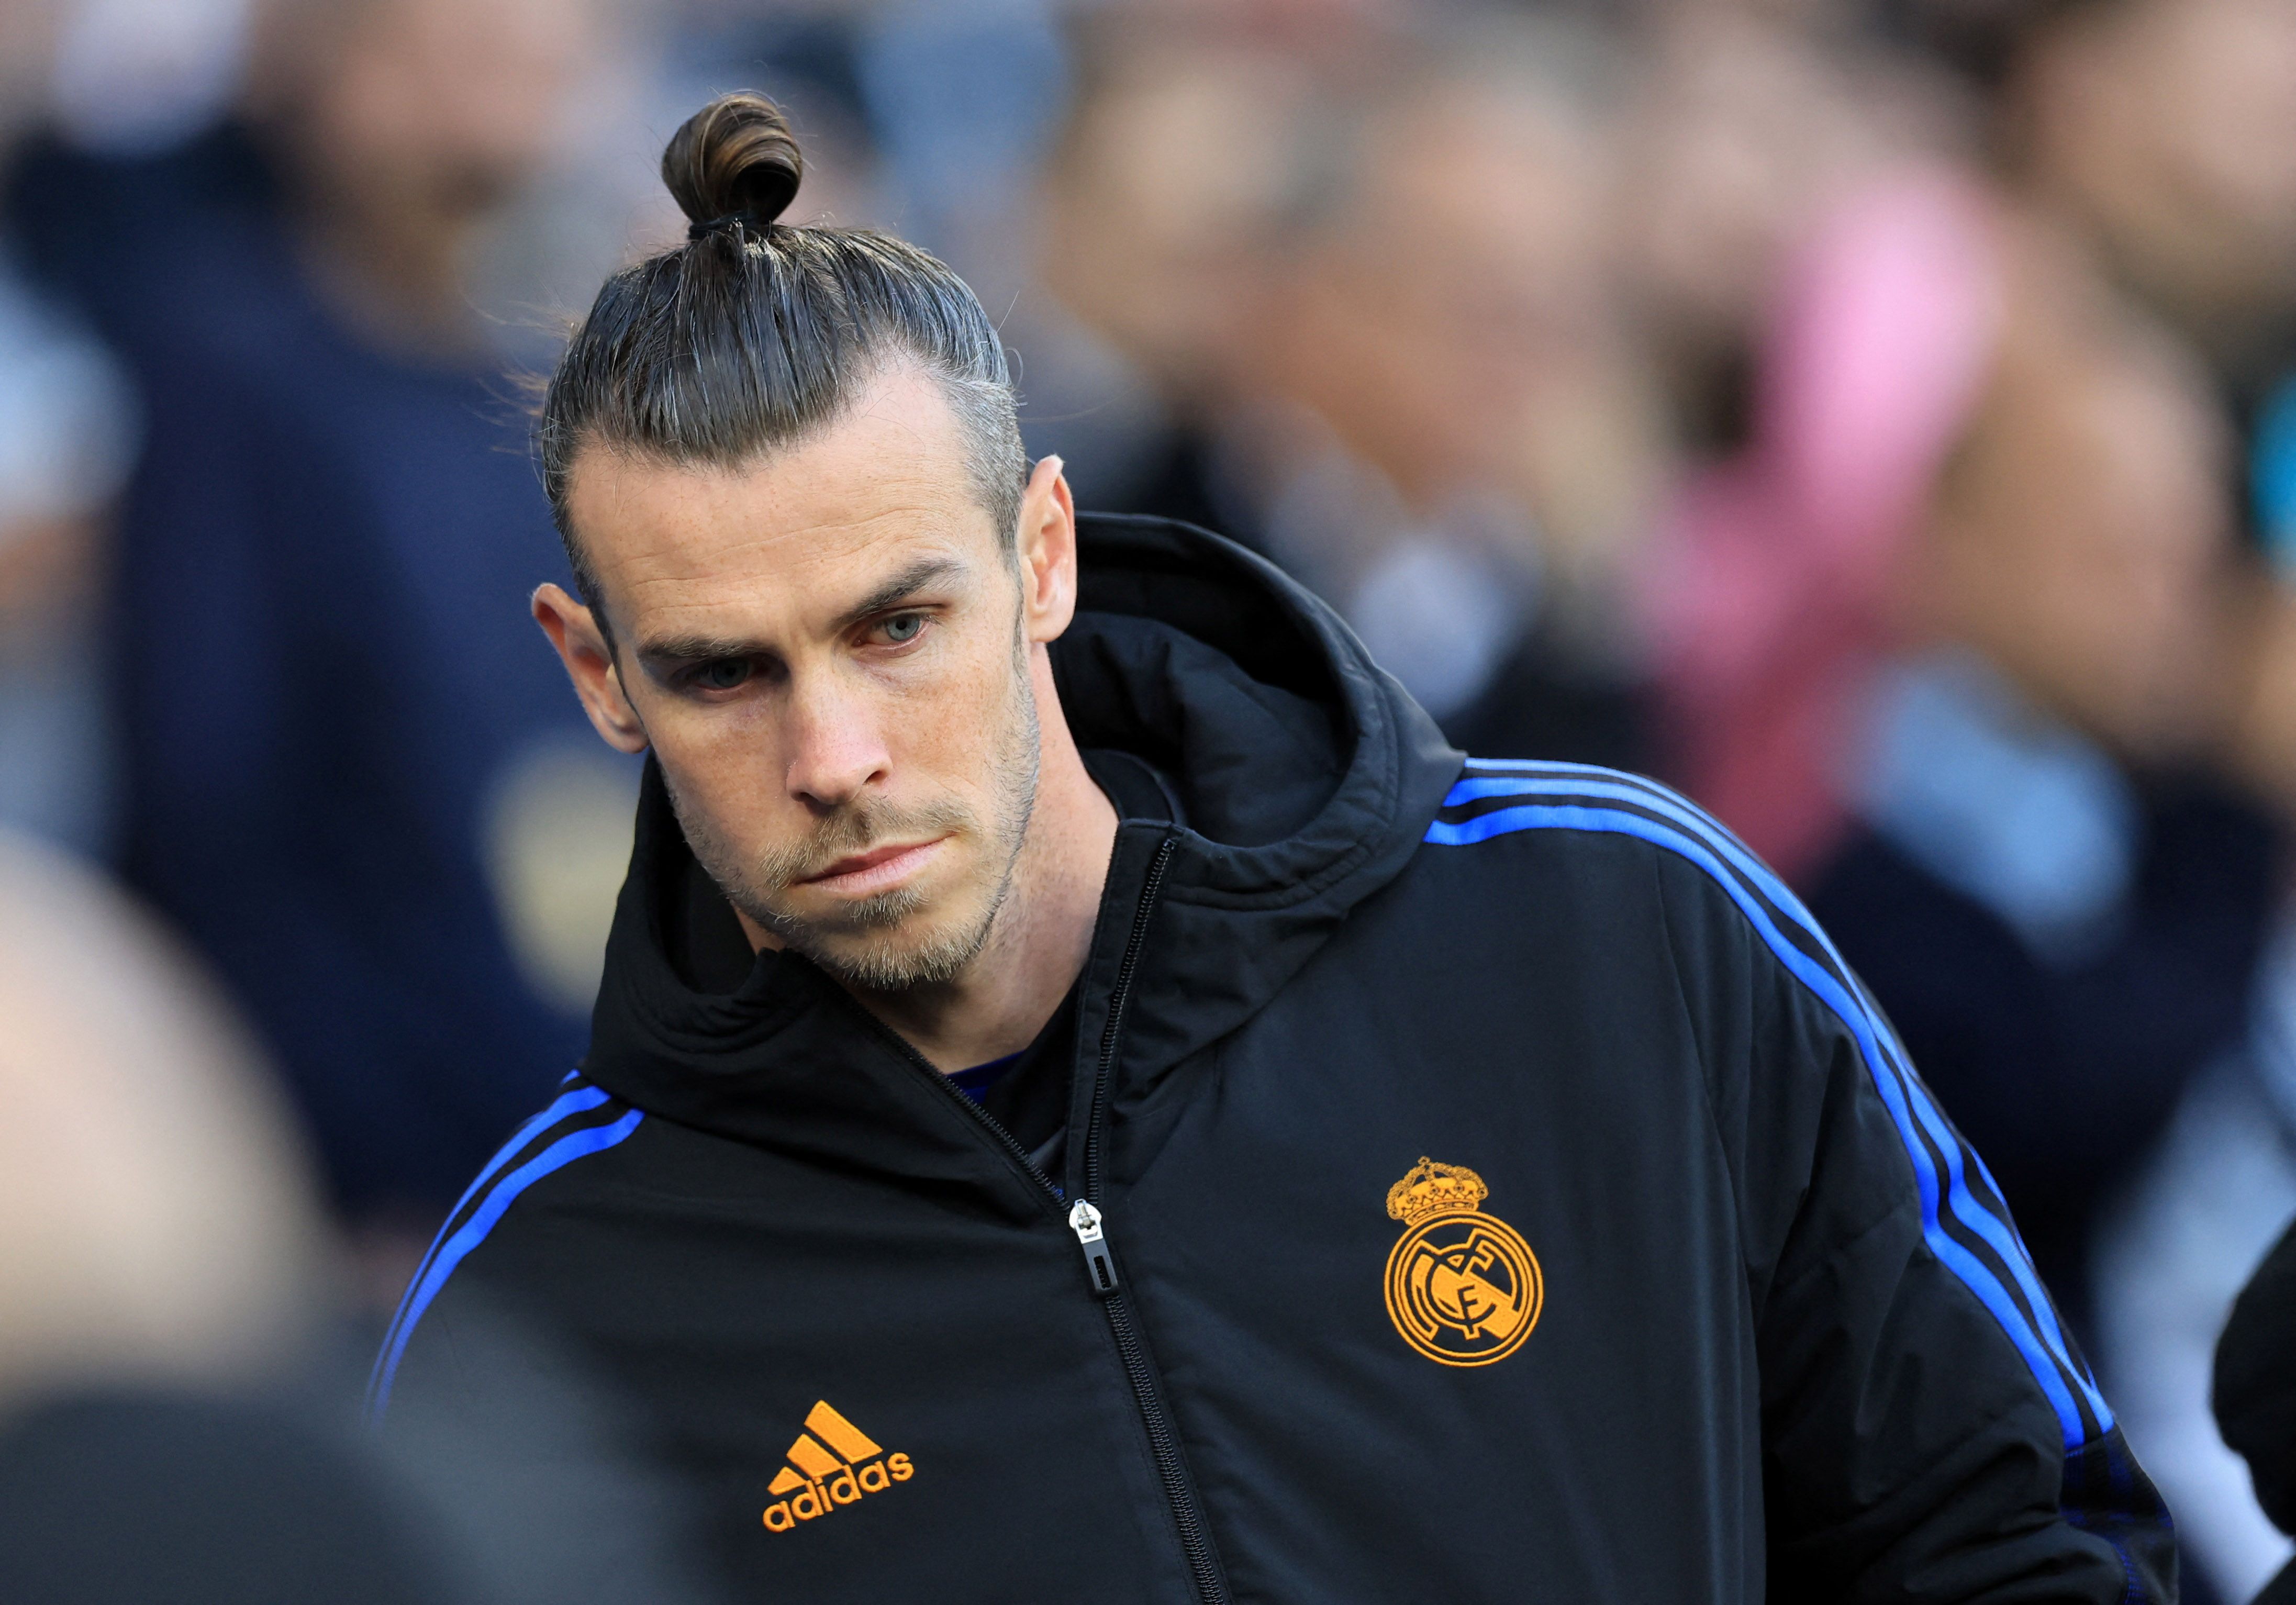 Bale in Real Madrid attire.